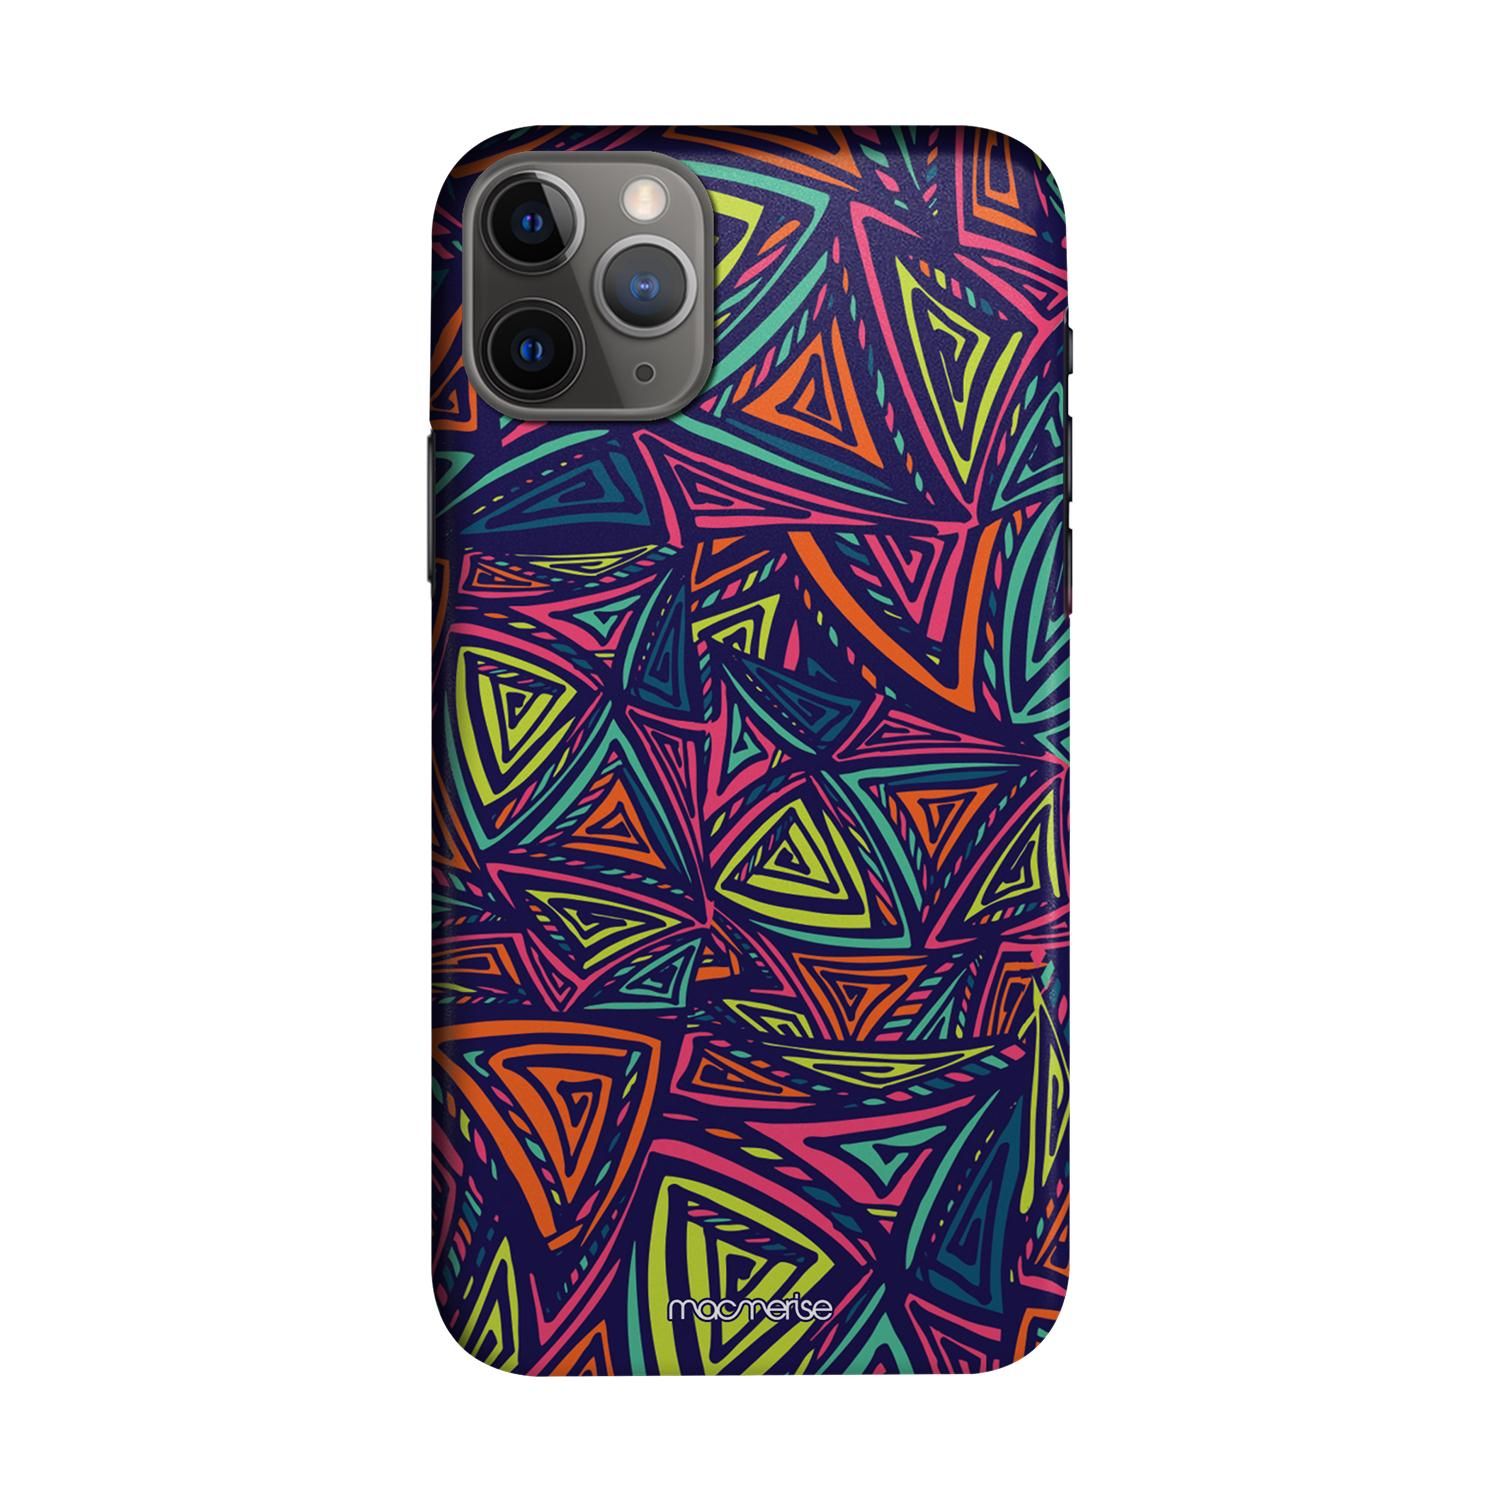 Neon Angles - Sleek Phone Case for iPhone 11 Pro Max